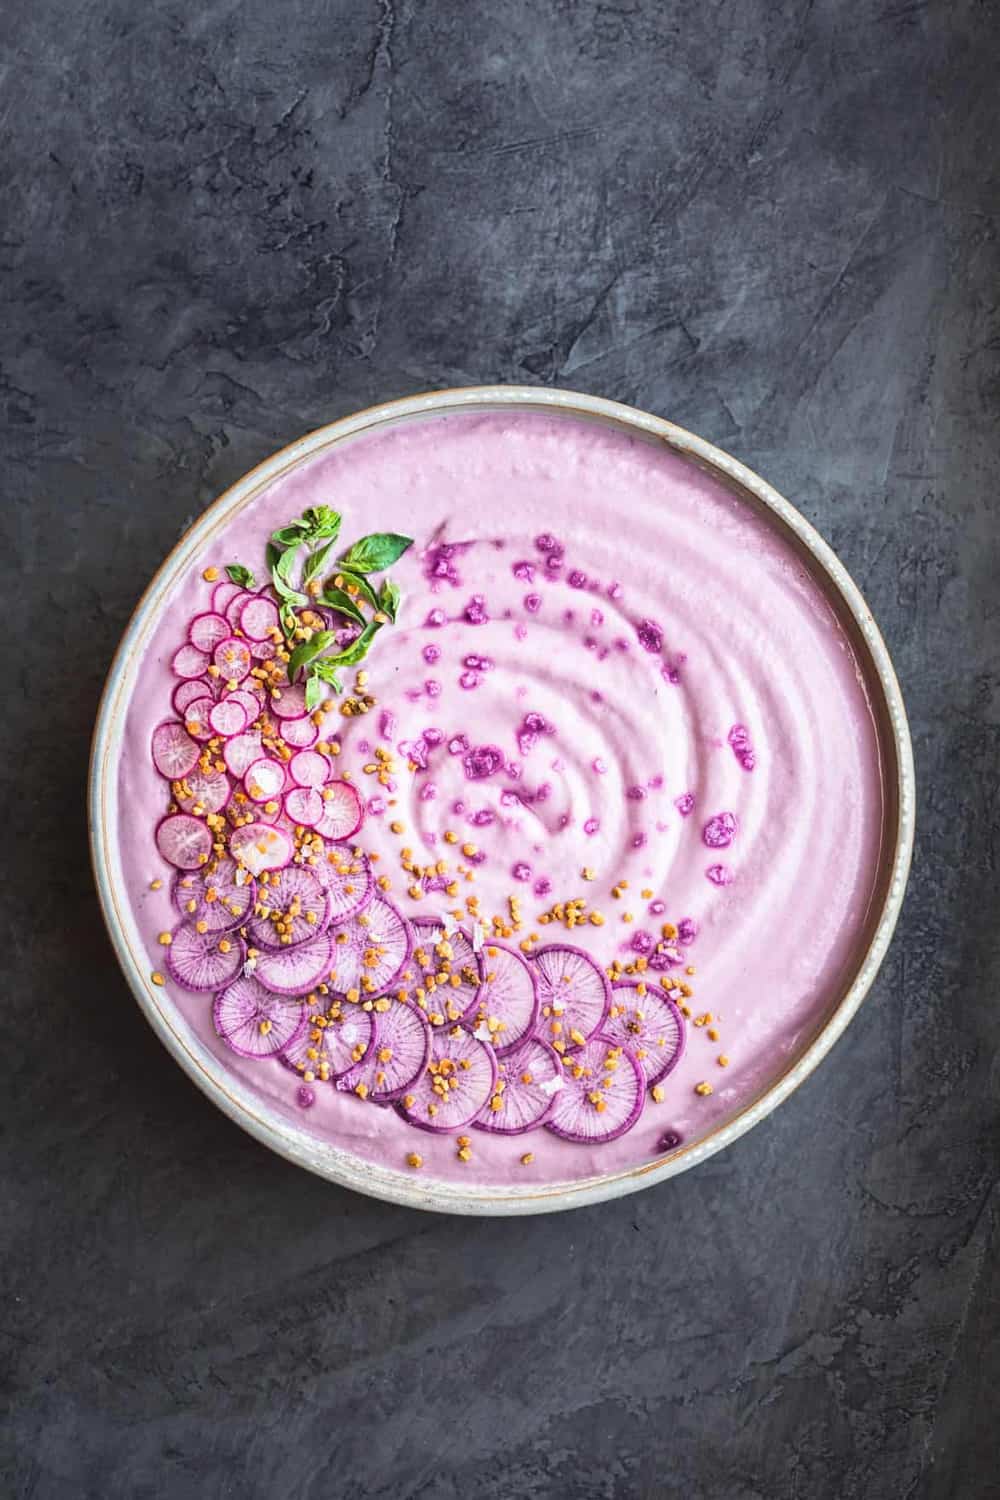 Vegan Purple Cauliflower Soup with Sliced Purple and Pink Radishes, tiny basil leaves, Bee Pollen and Flaky Sea Salt. Overhead shot. Bowl is in center of the frame on a dark grey background.